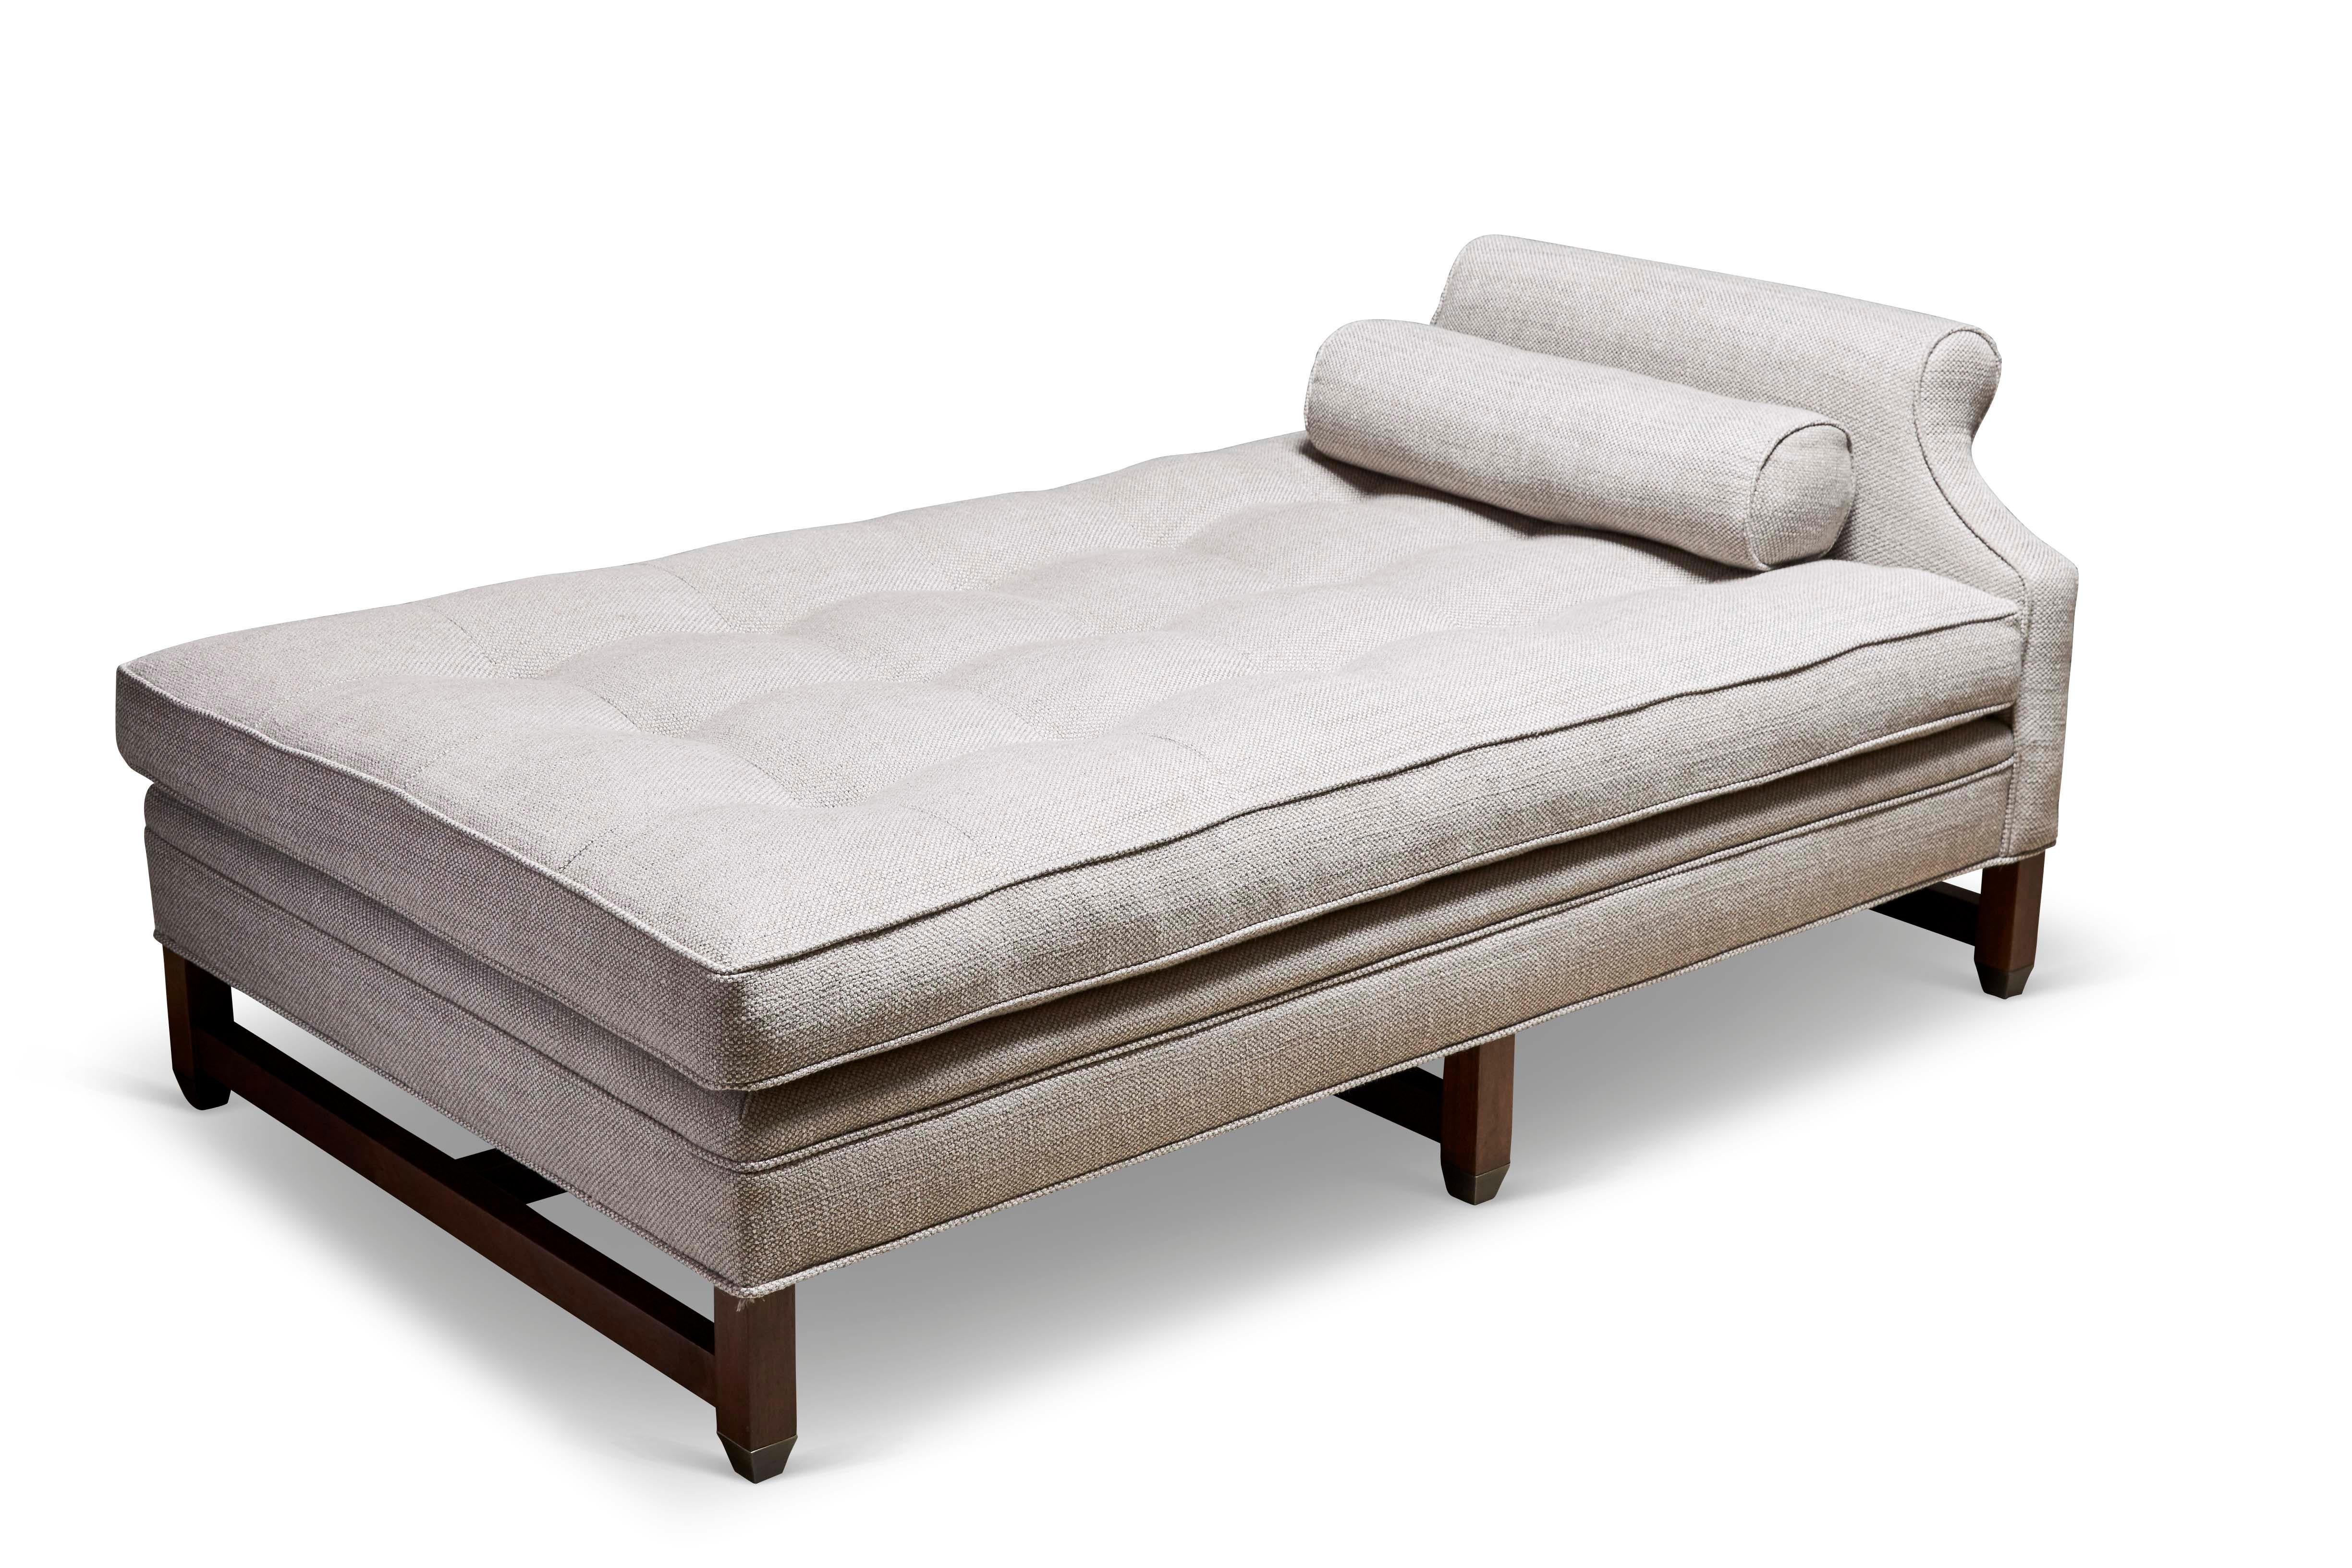 The Dutch daybed extra large has a semi-attached cushion with one bolster pillow. The base is made of American walnut or white oak and antique brass toecaps. 

The Lawson-Fenning Collection is designed and handmade in Los Angeles, California.